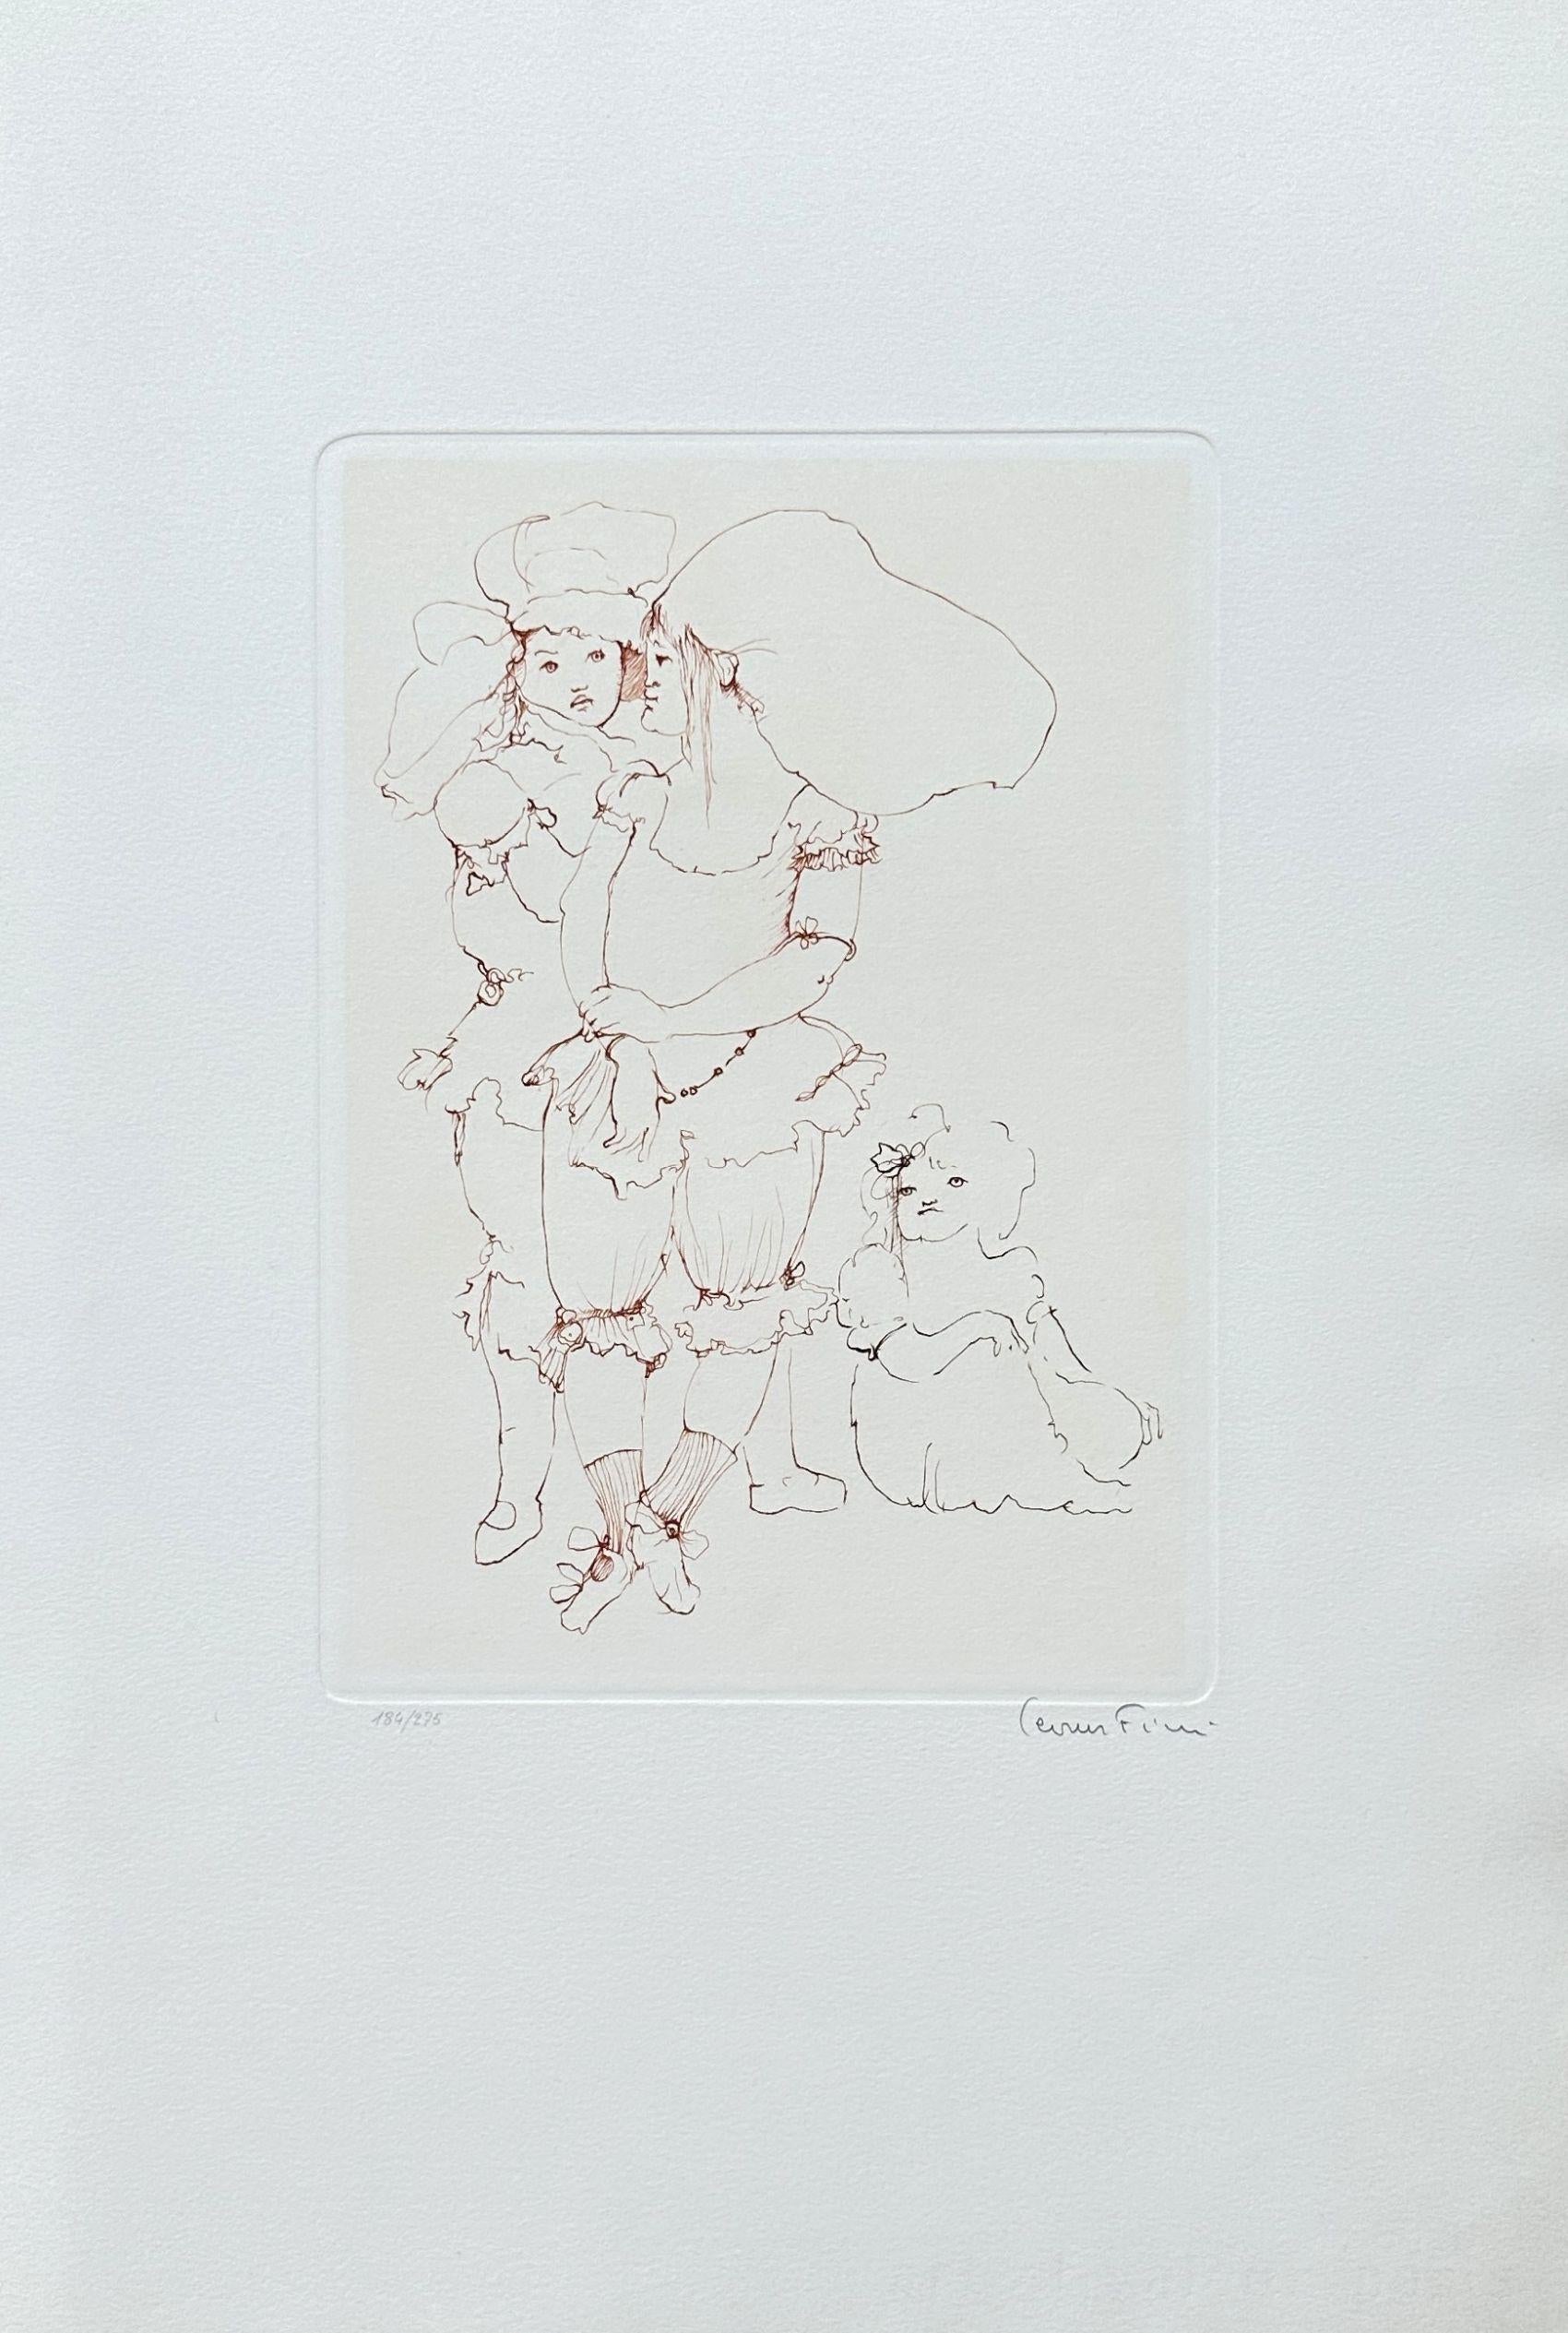 Leonor Fini Figurative Print - Family Portrait - Original Etching Hand Signed & Numbered